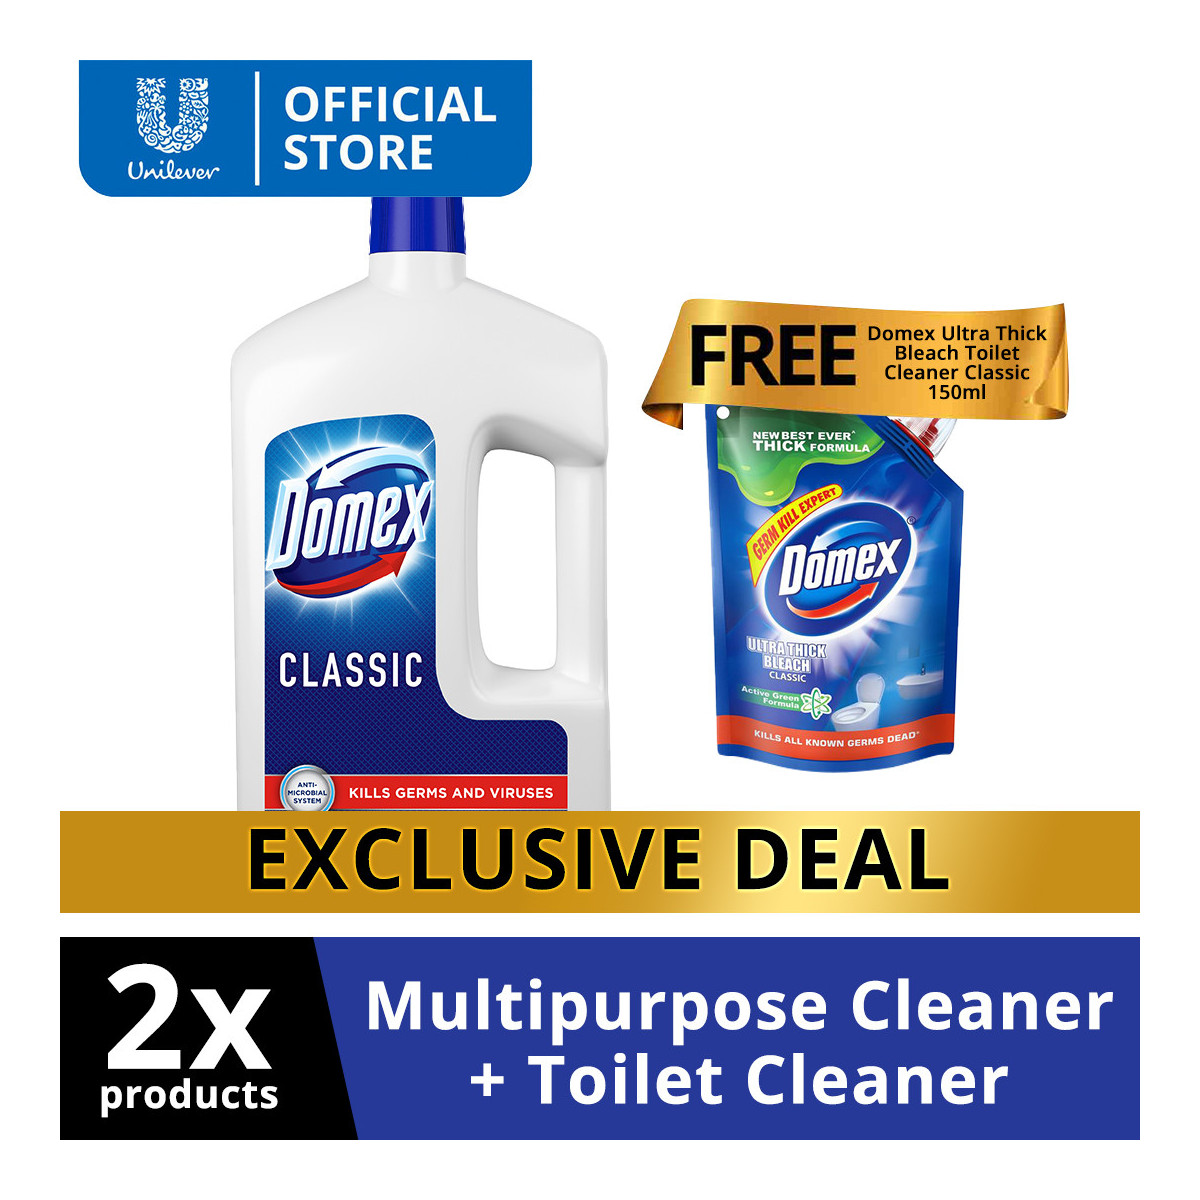 [BUY 1 TAKE 1] Domex Multi-Purpose Cleaner Classic 1L Bottle with FREE Domex Toilet Cleaner Classic 150ML Pouch